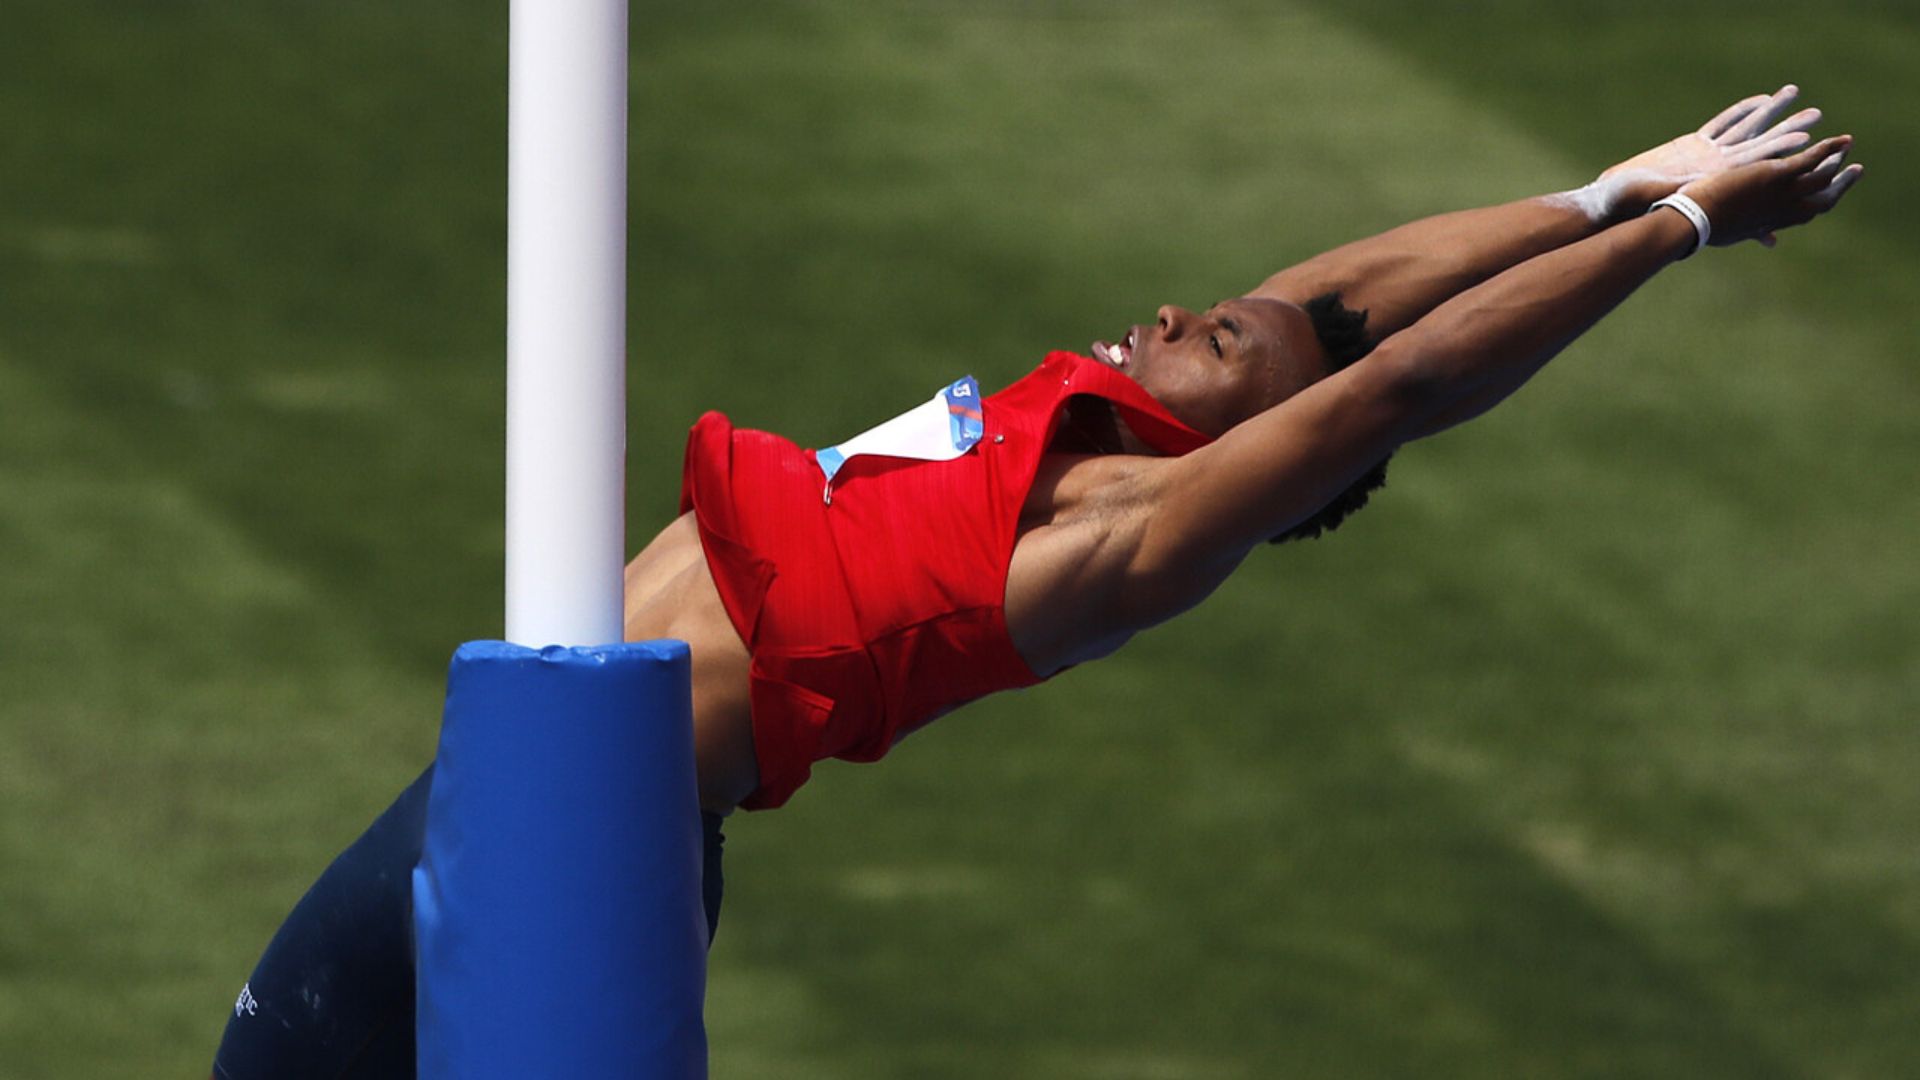 Santiago Ford to lead in the Decathlon's Grand Final